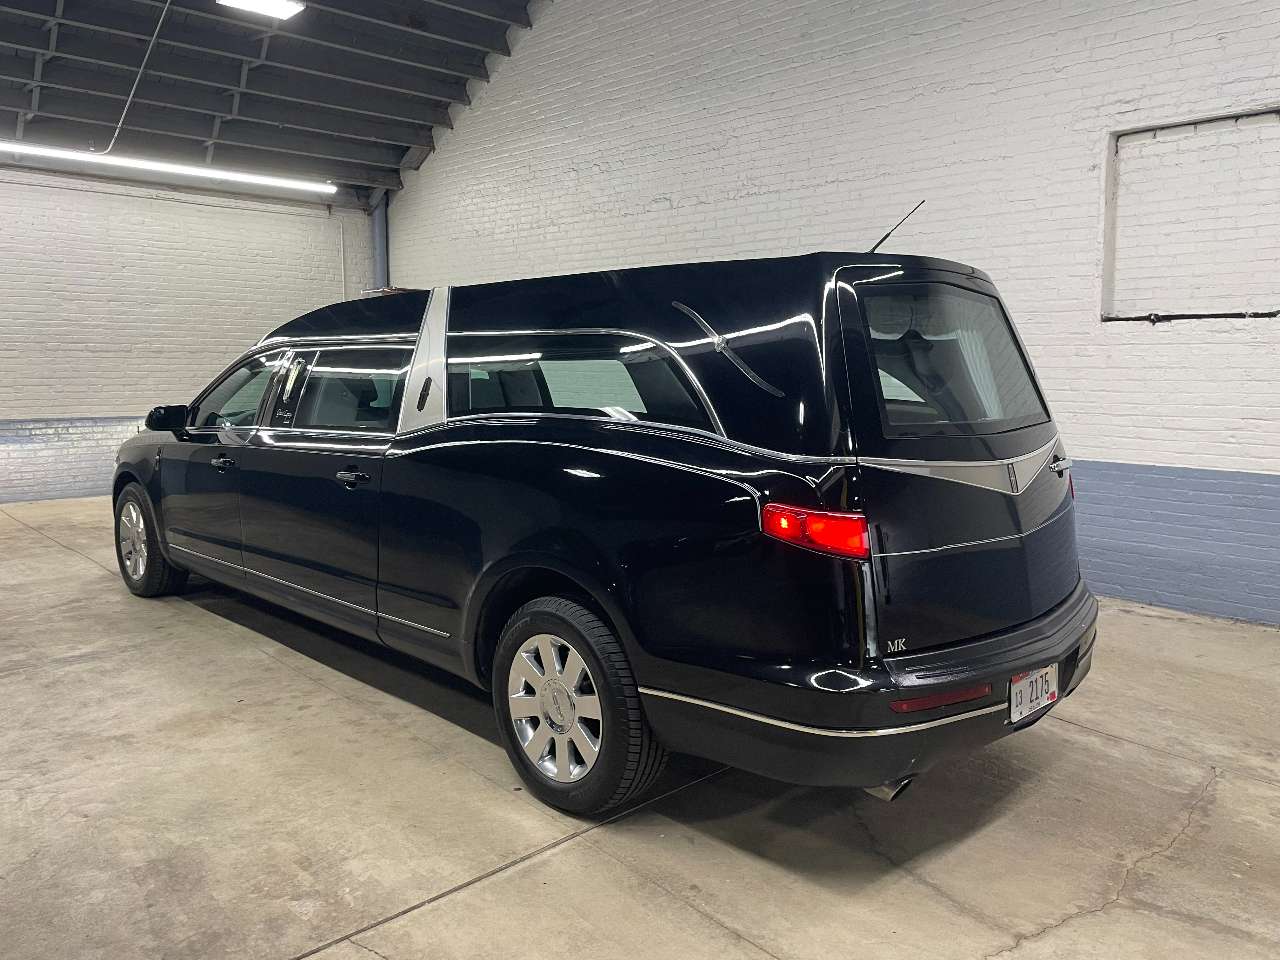 2017 Lincoln MK Grand Legacy Limited Hearse 1663948680251